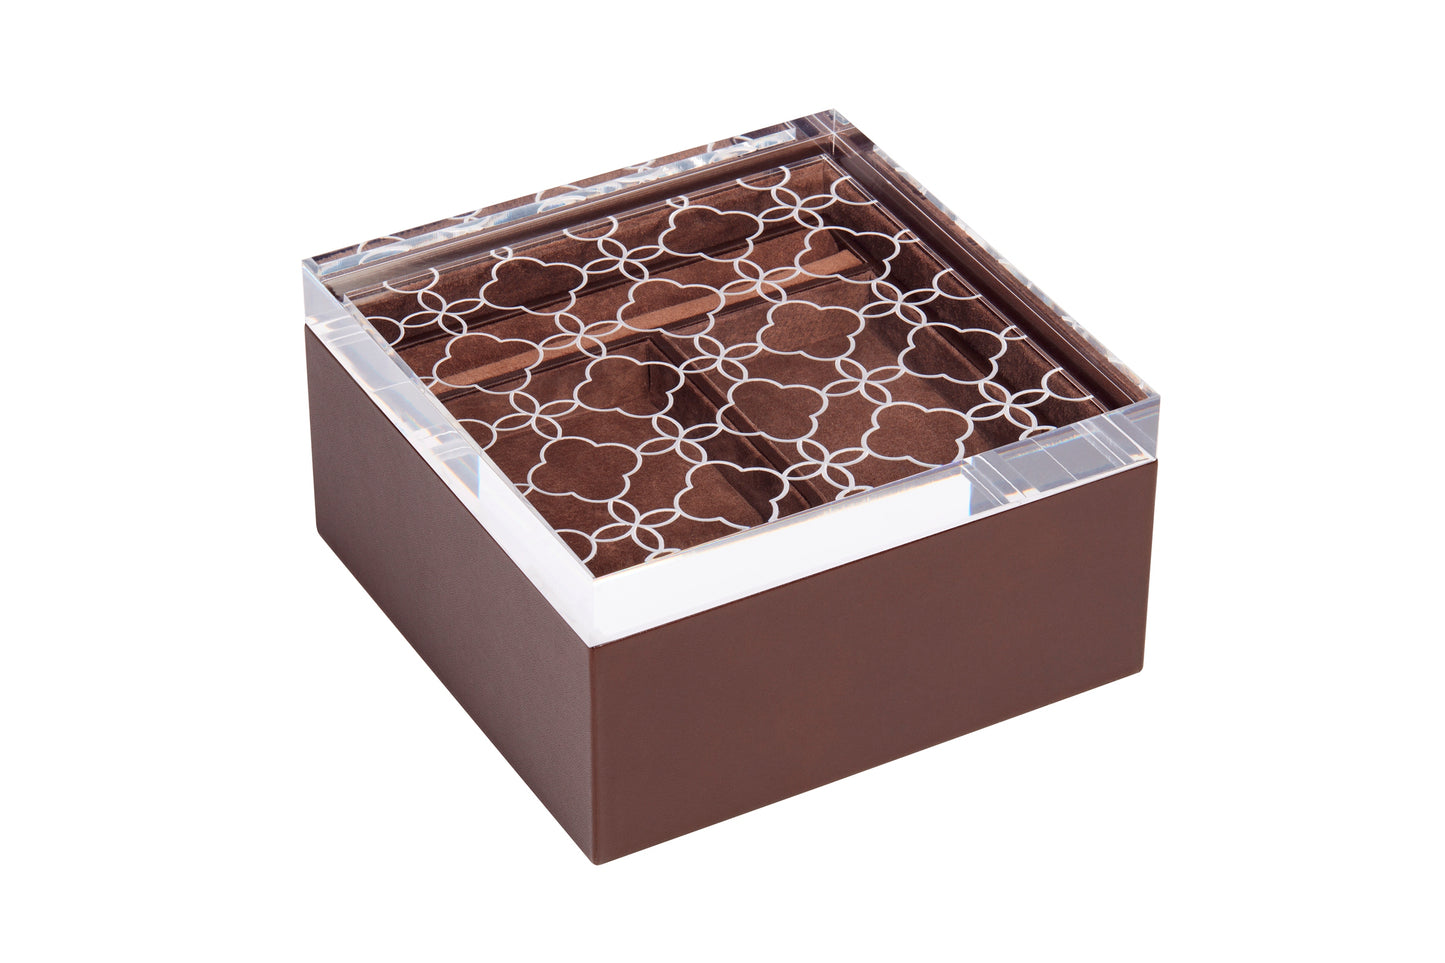 Riviere Iris Leather-Covered Jewellery Box with Removable Tray | Elegant Design with Removable Tray for Organizing Jewelry | Suede Lining and Floral Carved Acrylic Lid for a Touch of Sophistication | Explore a Range of Luxury Jewellery Boxes at 2Jour Concierge, #1 luxury high-end gift & lifestyle shop